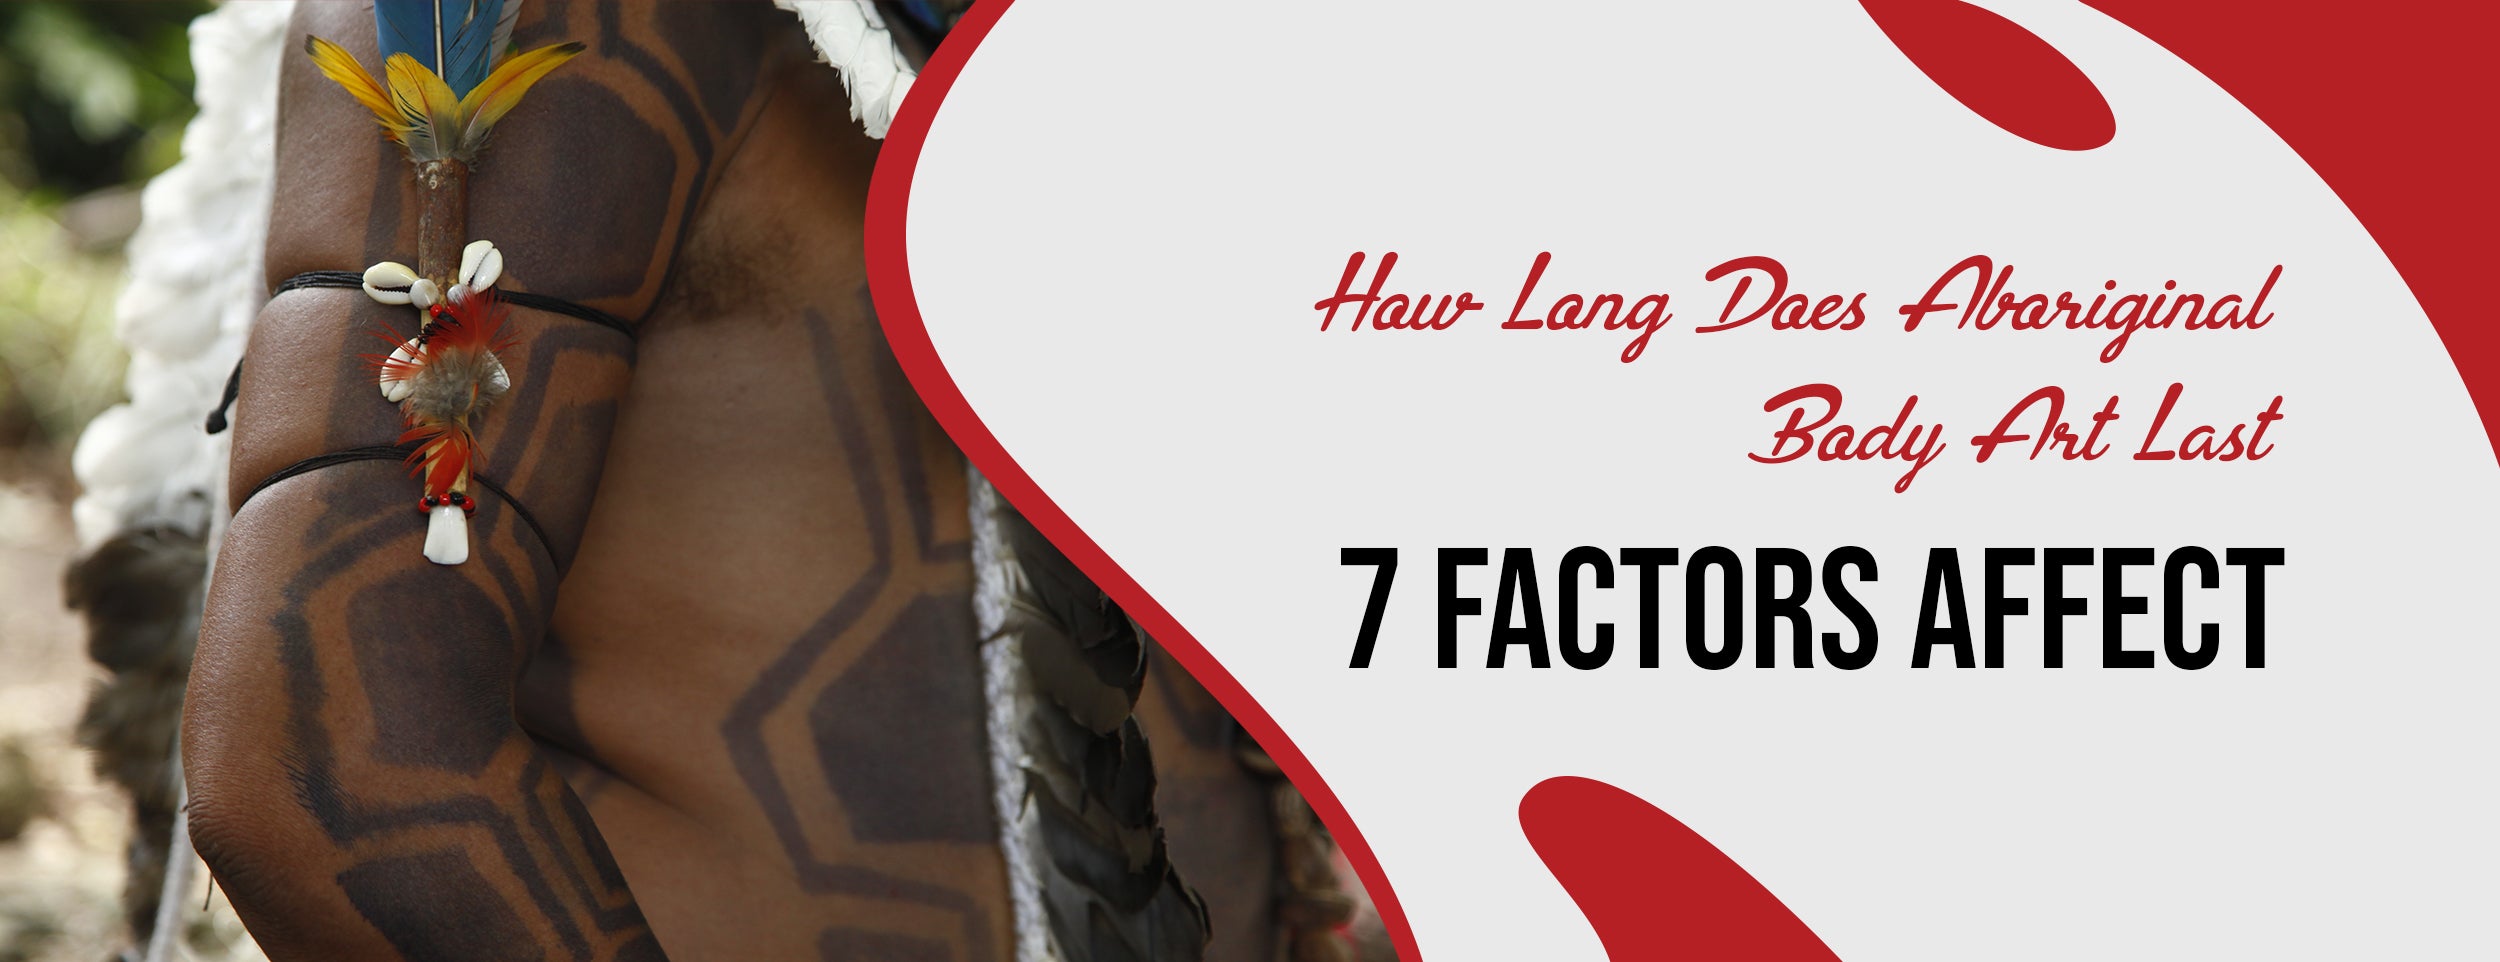 The Duration of Aboriginal Body Art [Factors Affecting It]